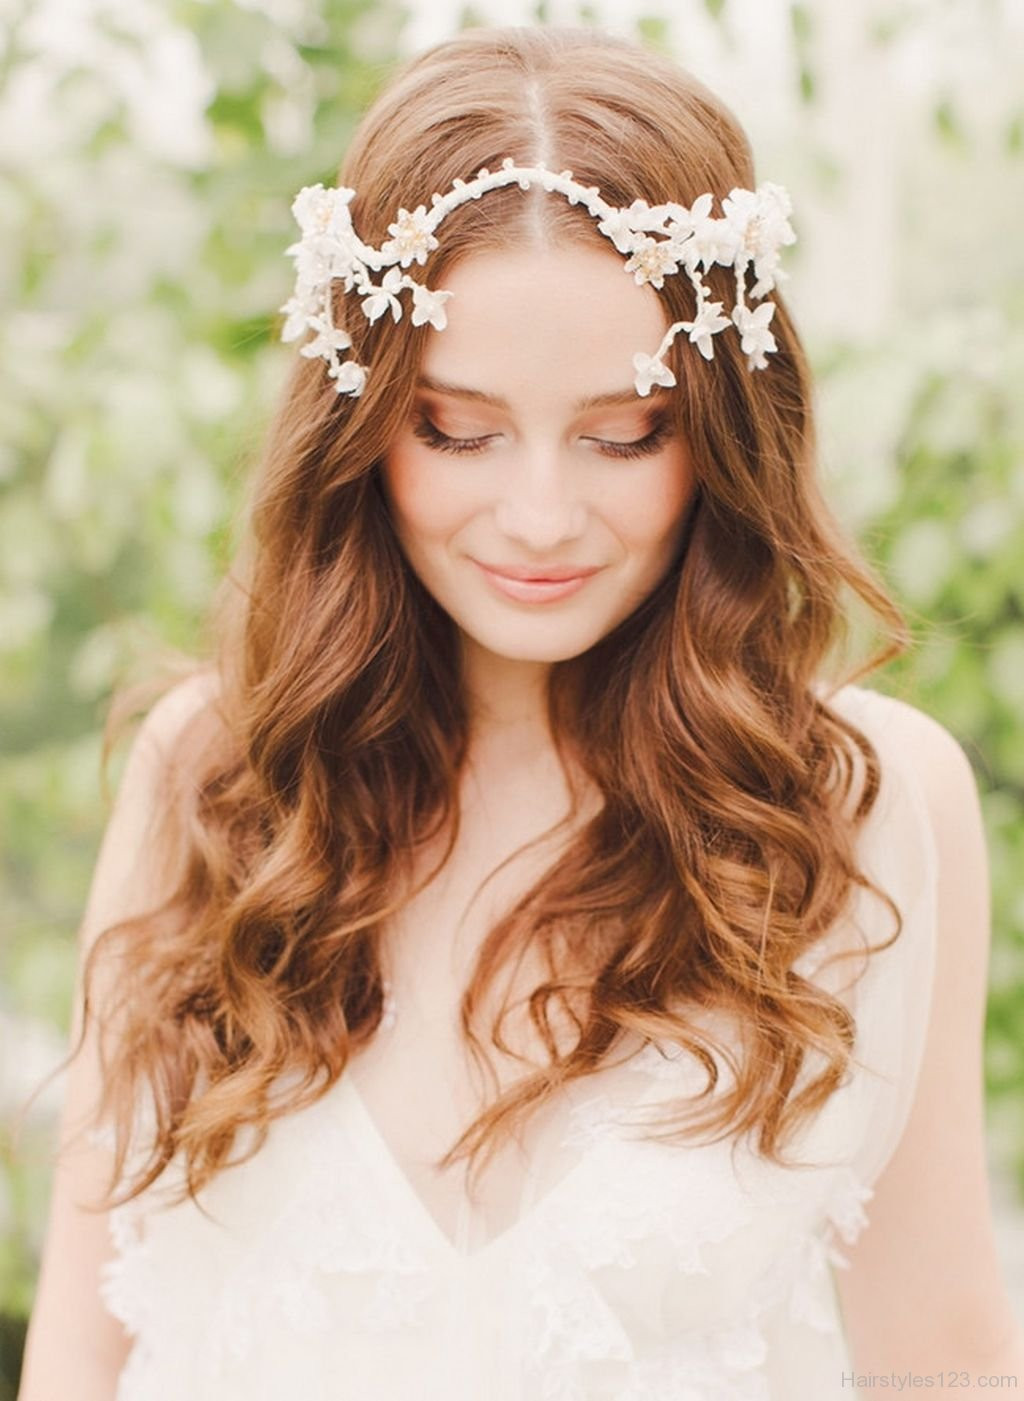 Pictures Of Wedding Hairstyles For Long Hair
 20 Classic Wedding Hairstyles Long Hair MagMent